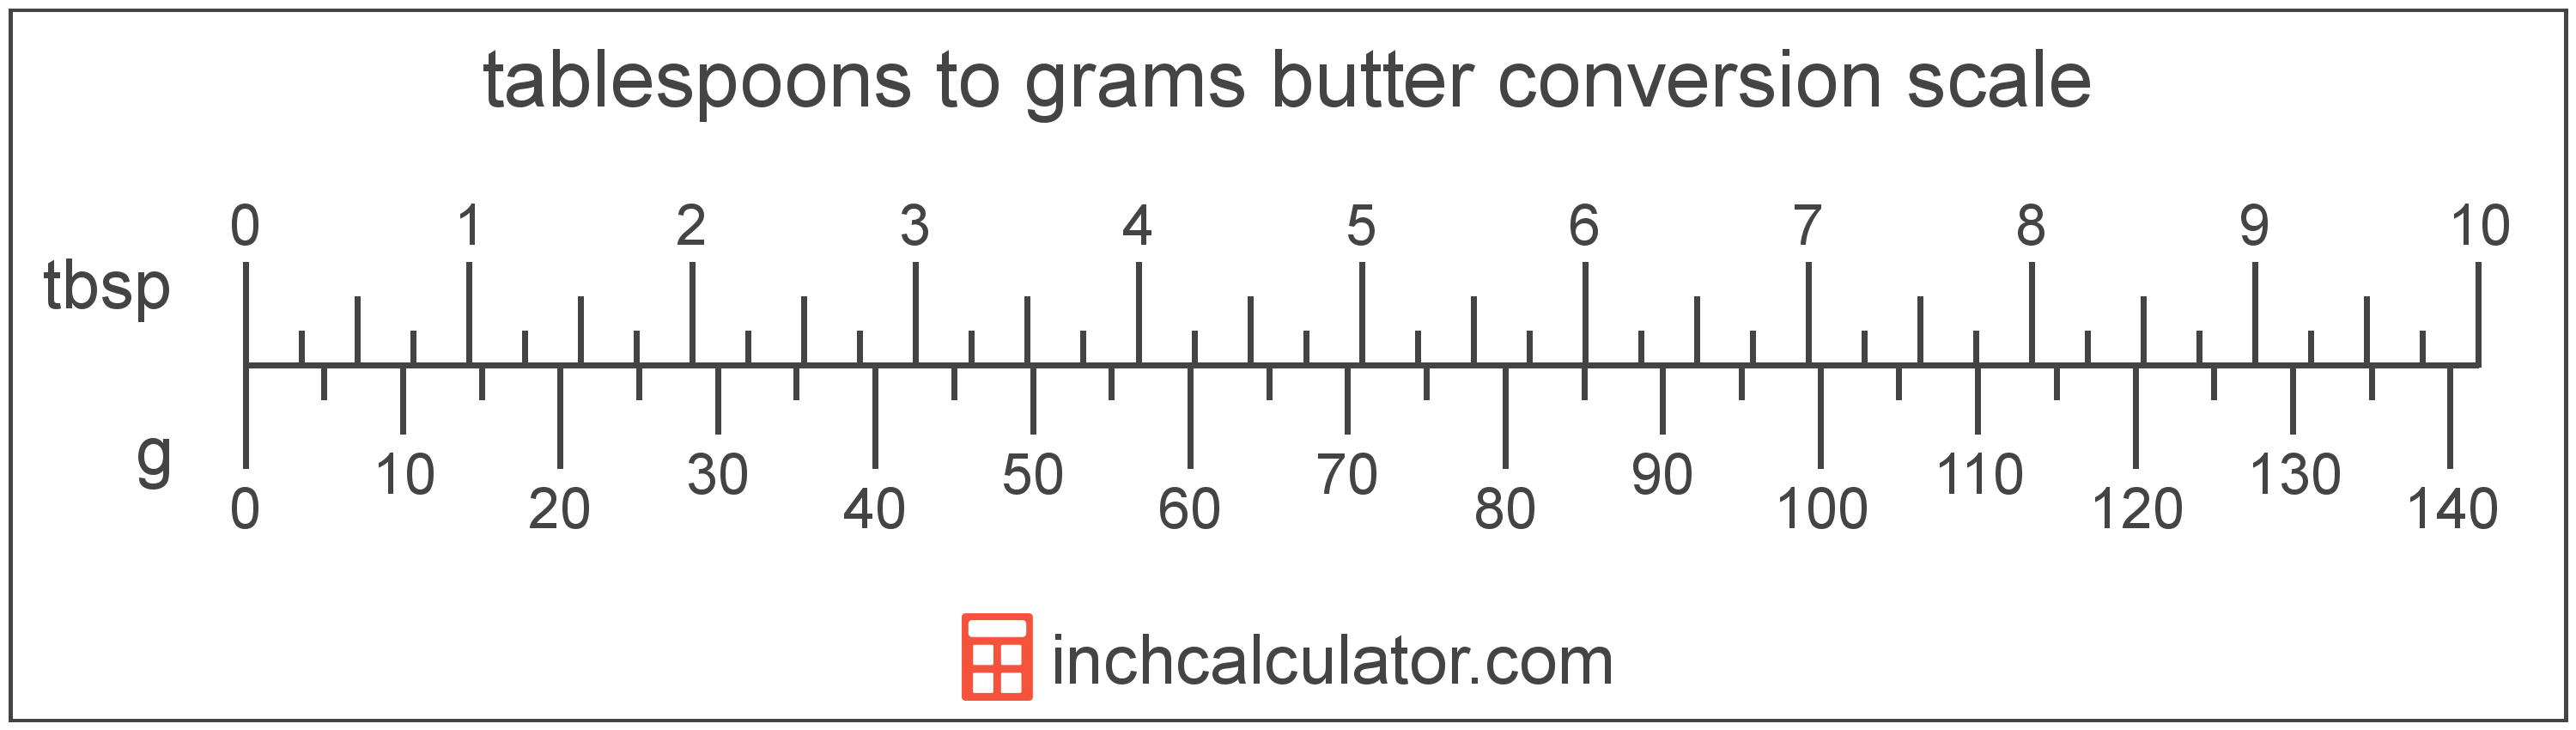 conversion scale showing tablespoons and equivalent grams butter values